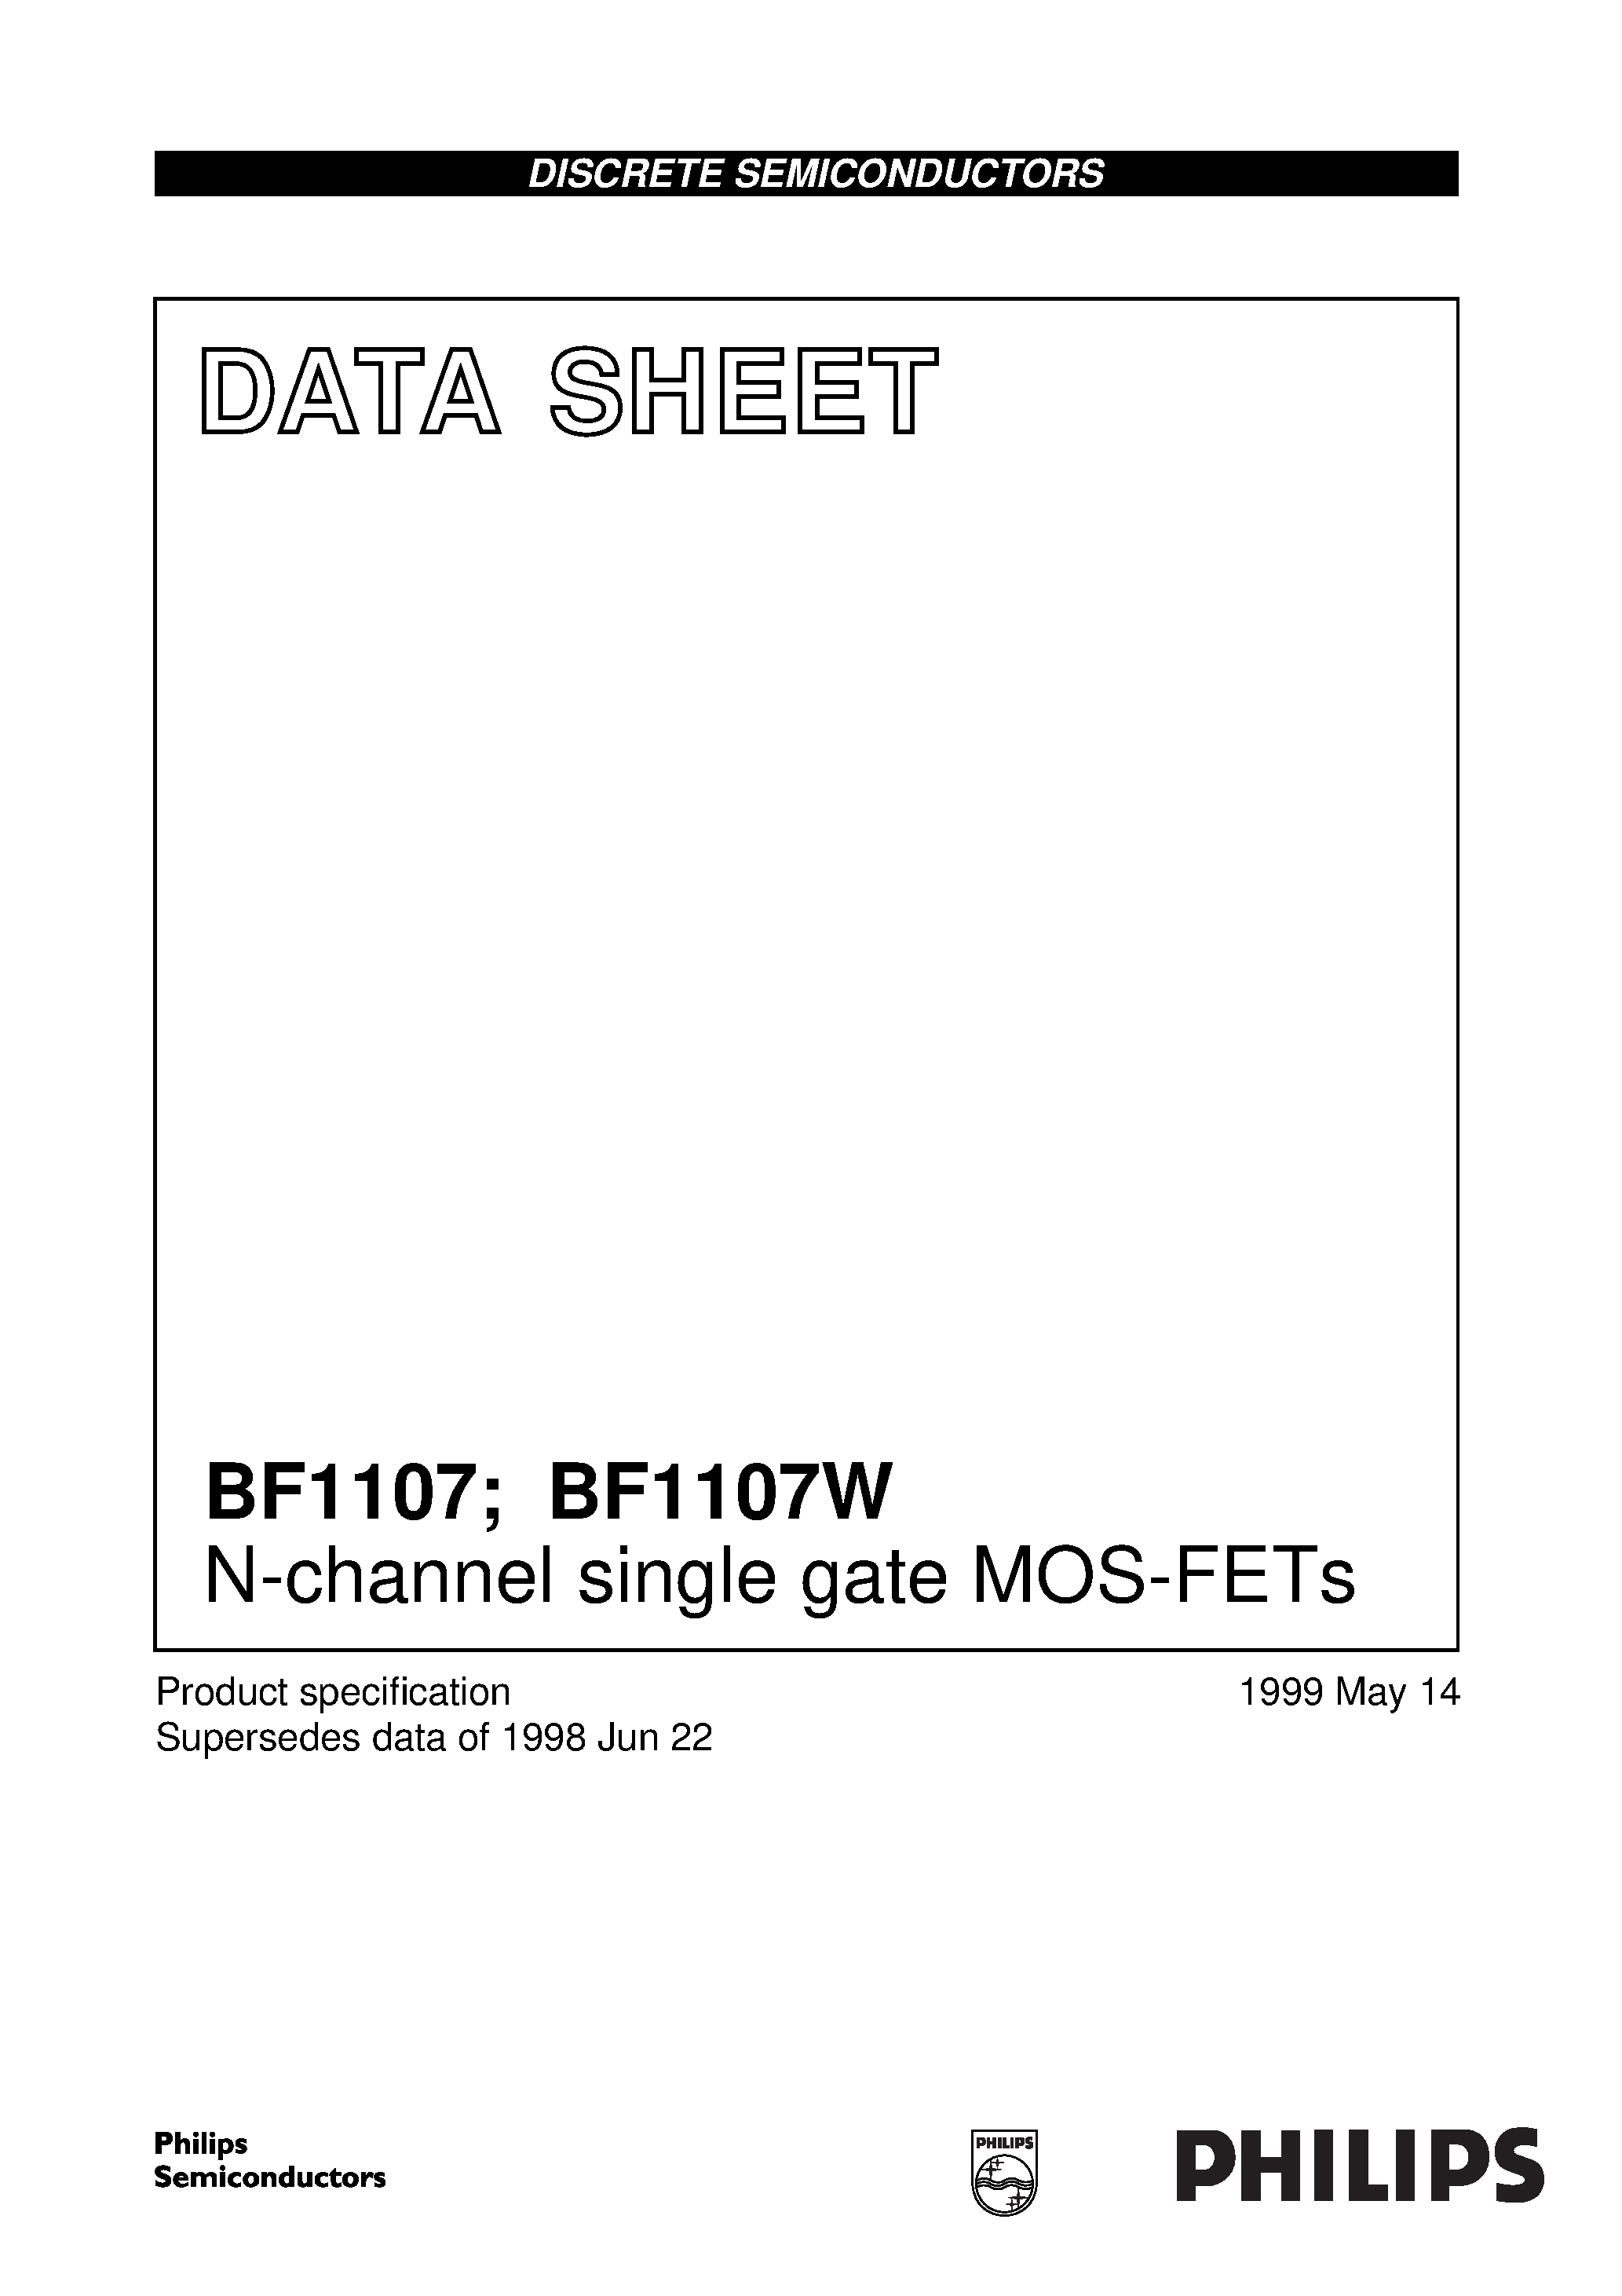 Datasheet BF1107W - N-channel single gate MOS-FETs page 1